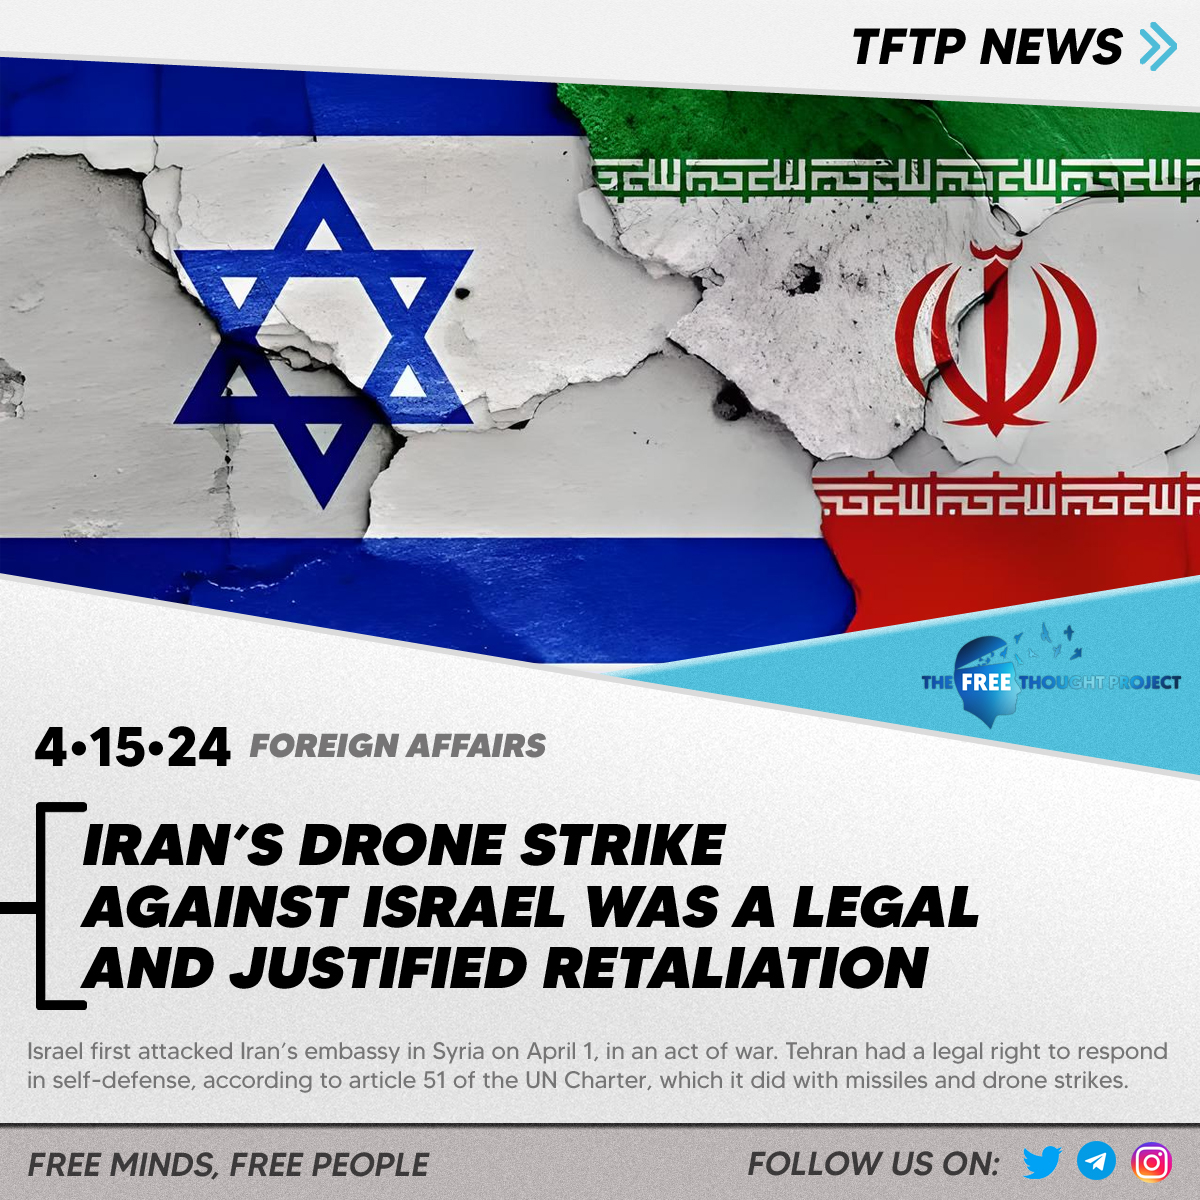 Also don't forget that Israel has repeatedly bombed Lebanon, a top UN expert has formally accused Israel of genocide in Gaza; and Israel has flagrantly violated a ruling by the International Court of Justice. Read More: thefreethoughtproject.com/foreign-affair… #TheFreeThoughtProject